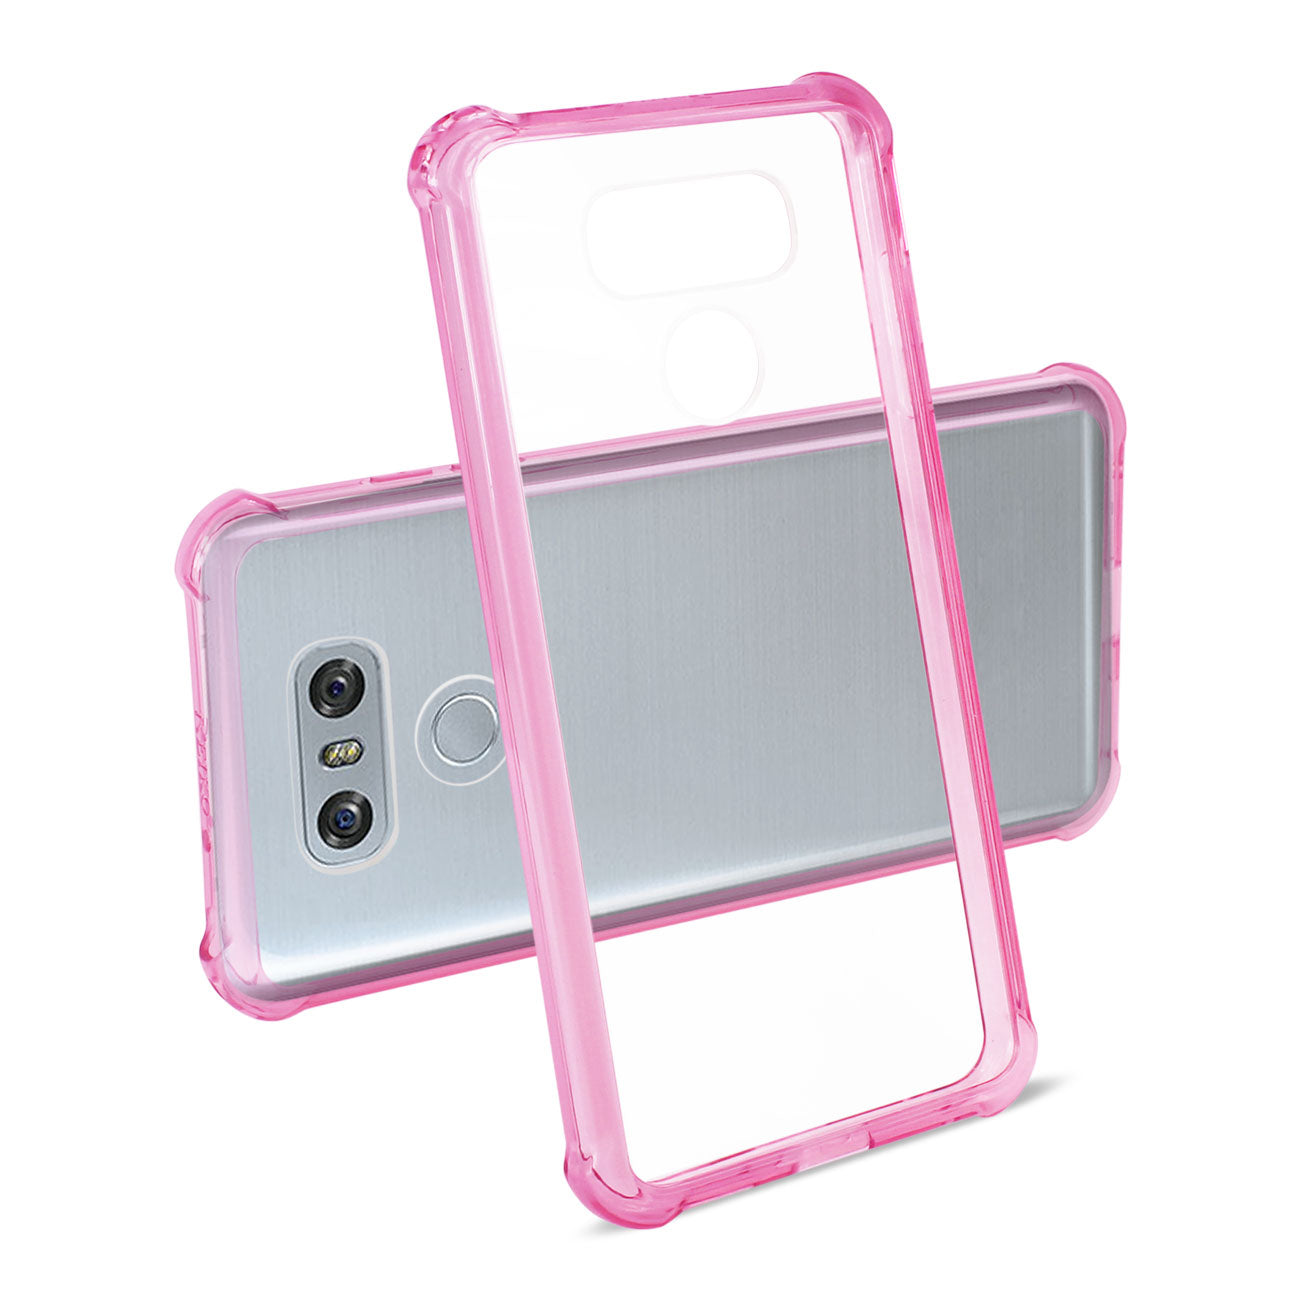 LG G6 Clear Bumper Case With Air Cushion Shock Absorption In Clear Hot Pink